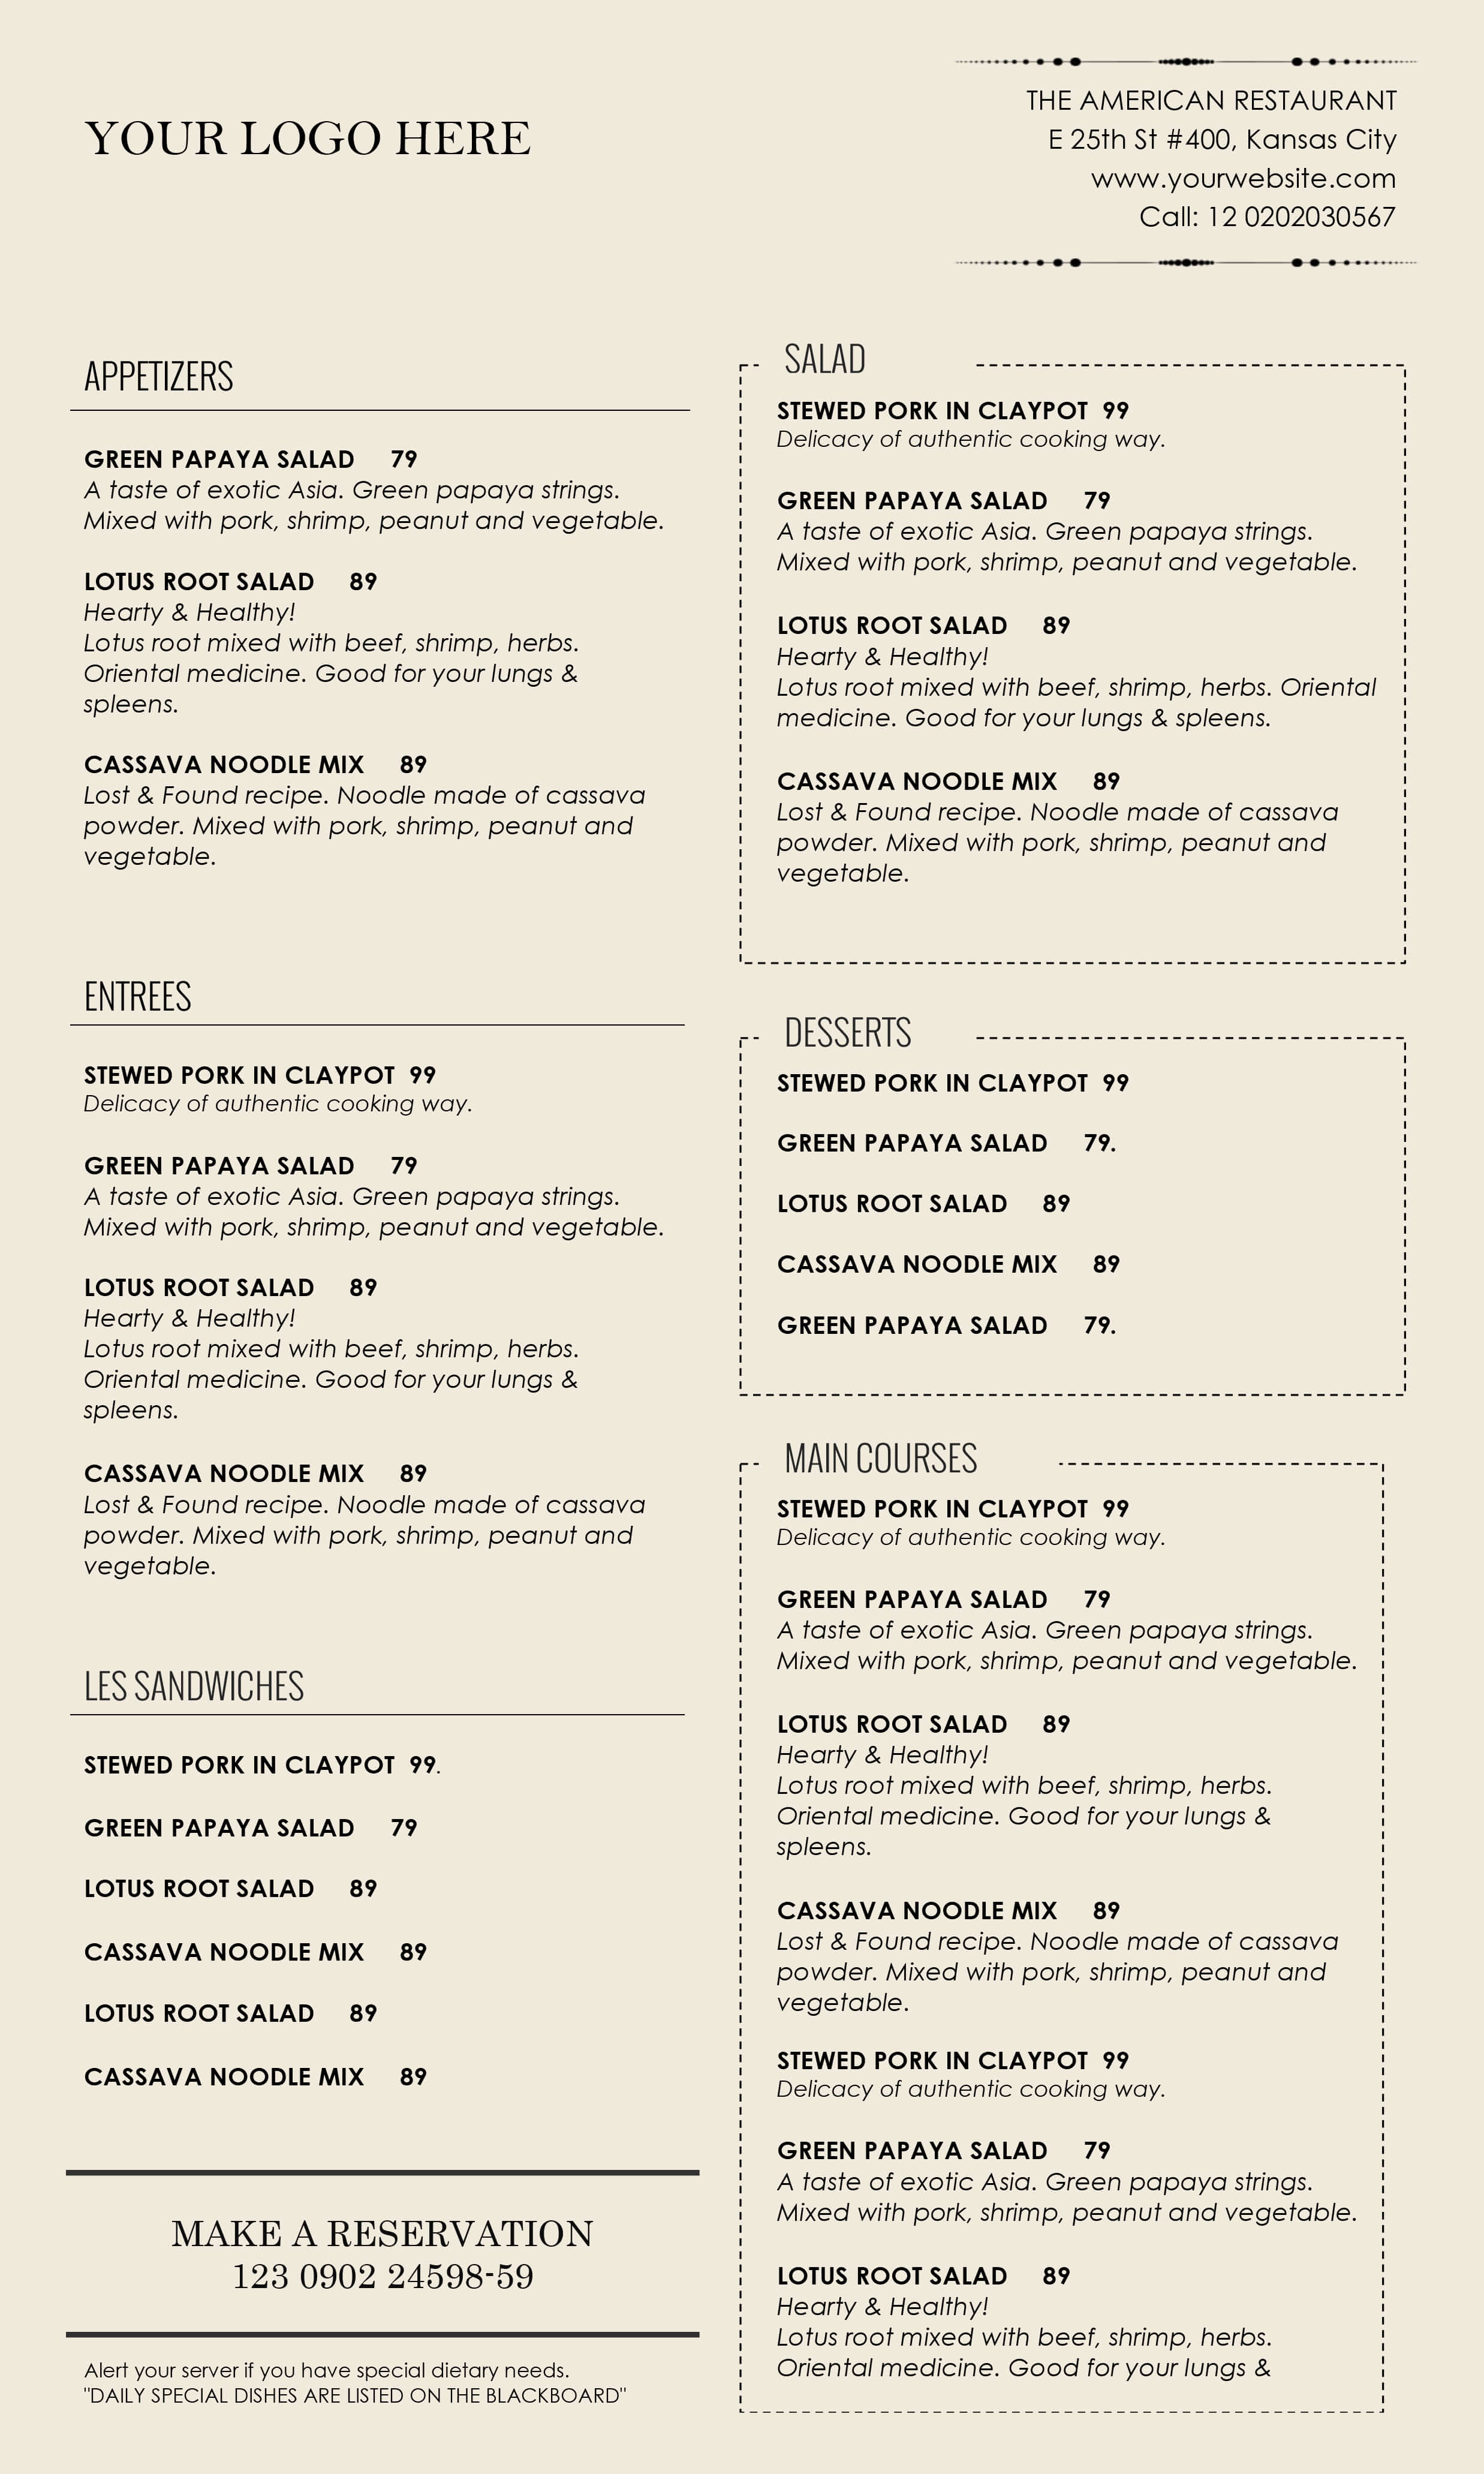 Free Cafe Menu Templates For Word - Atlantaauctionco With Free Cafe Menu Templates For Word